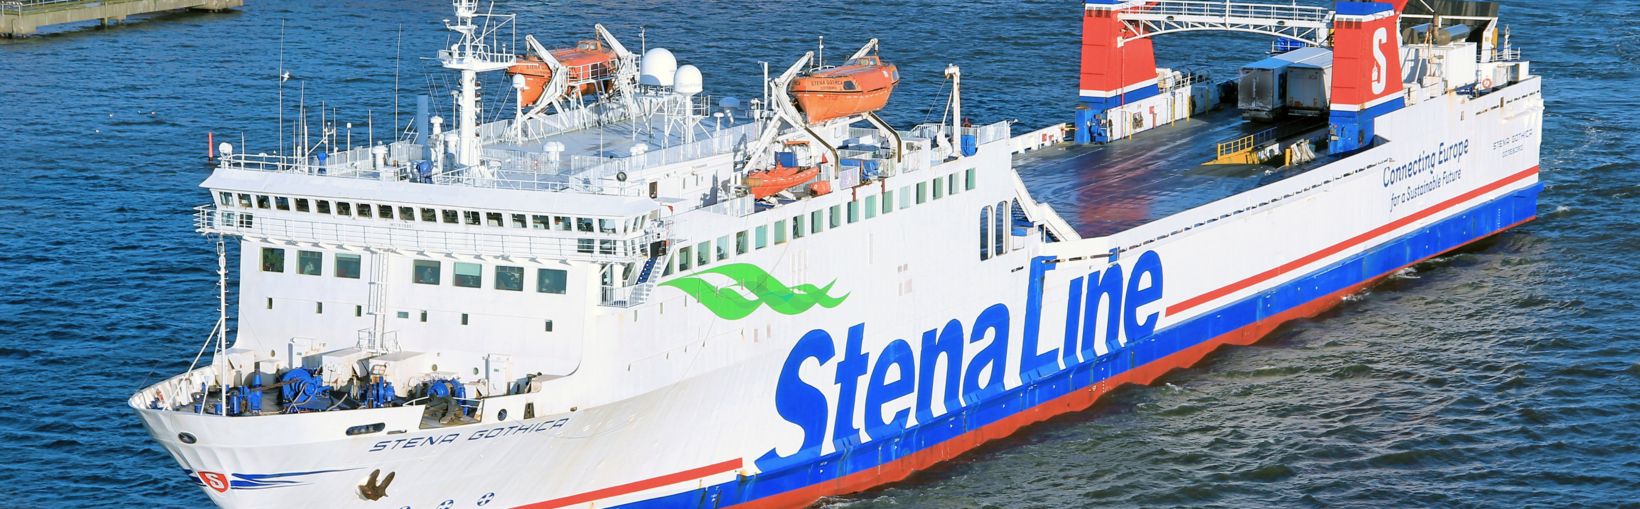 Ferry Stena Gothica quittant le port